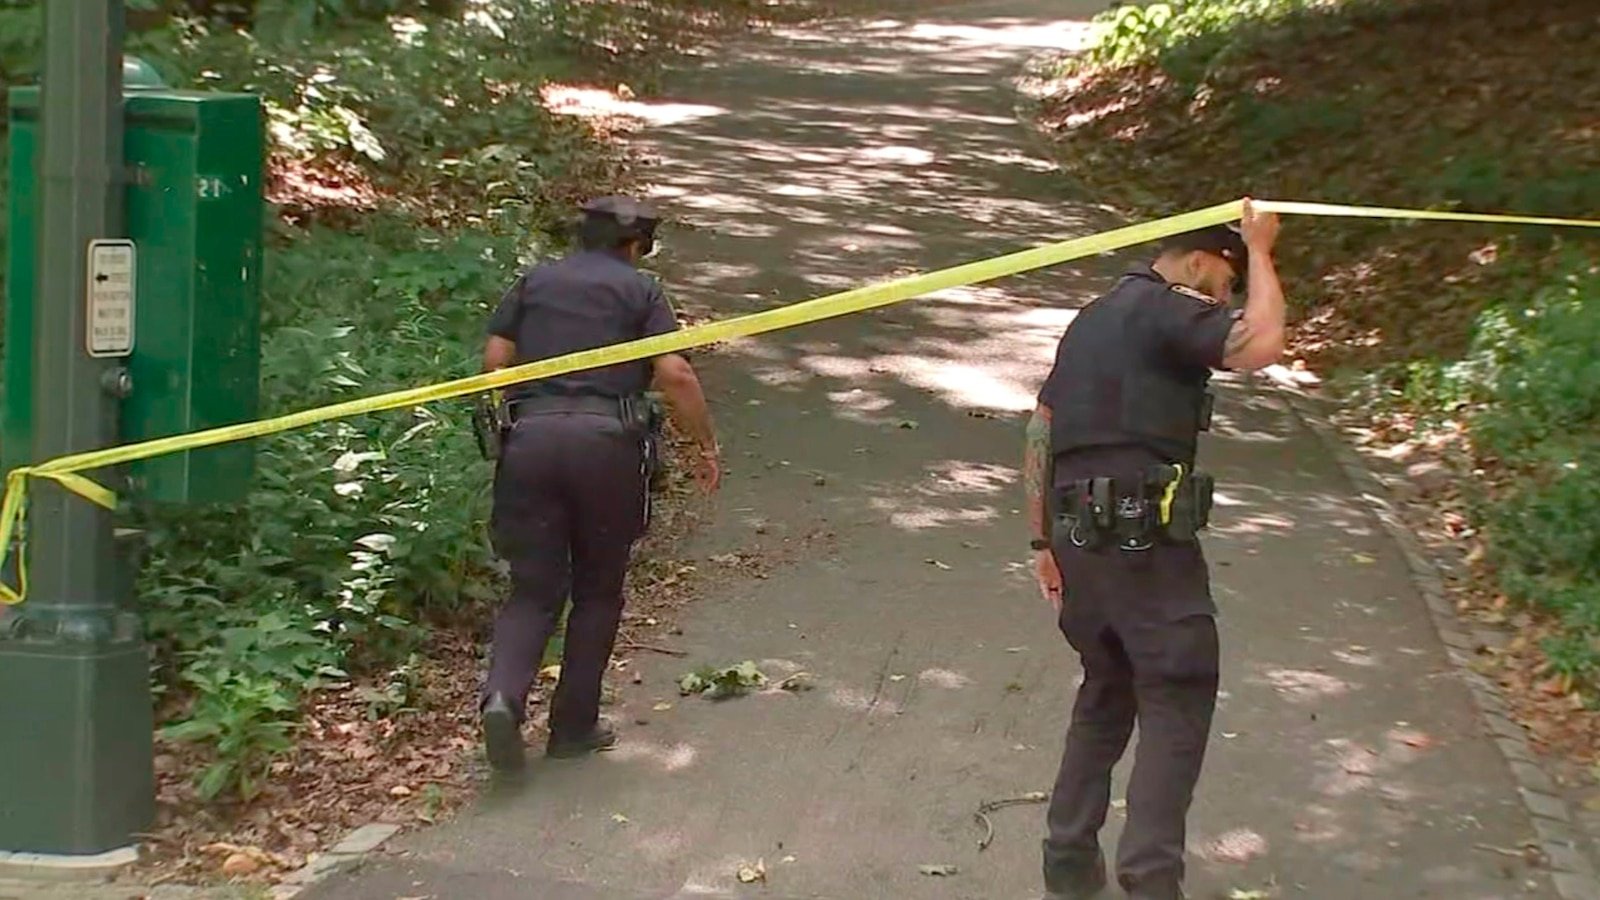 Person of interest in custody for attempted rape of Central Park sunbather: Sources